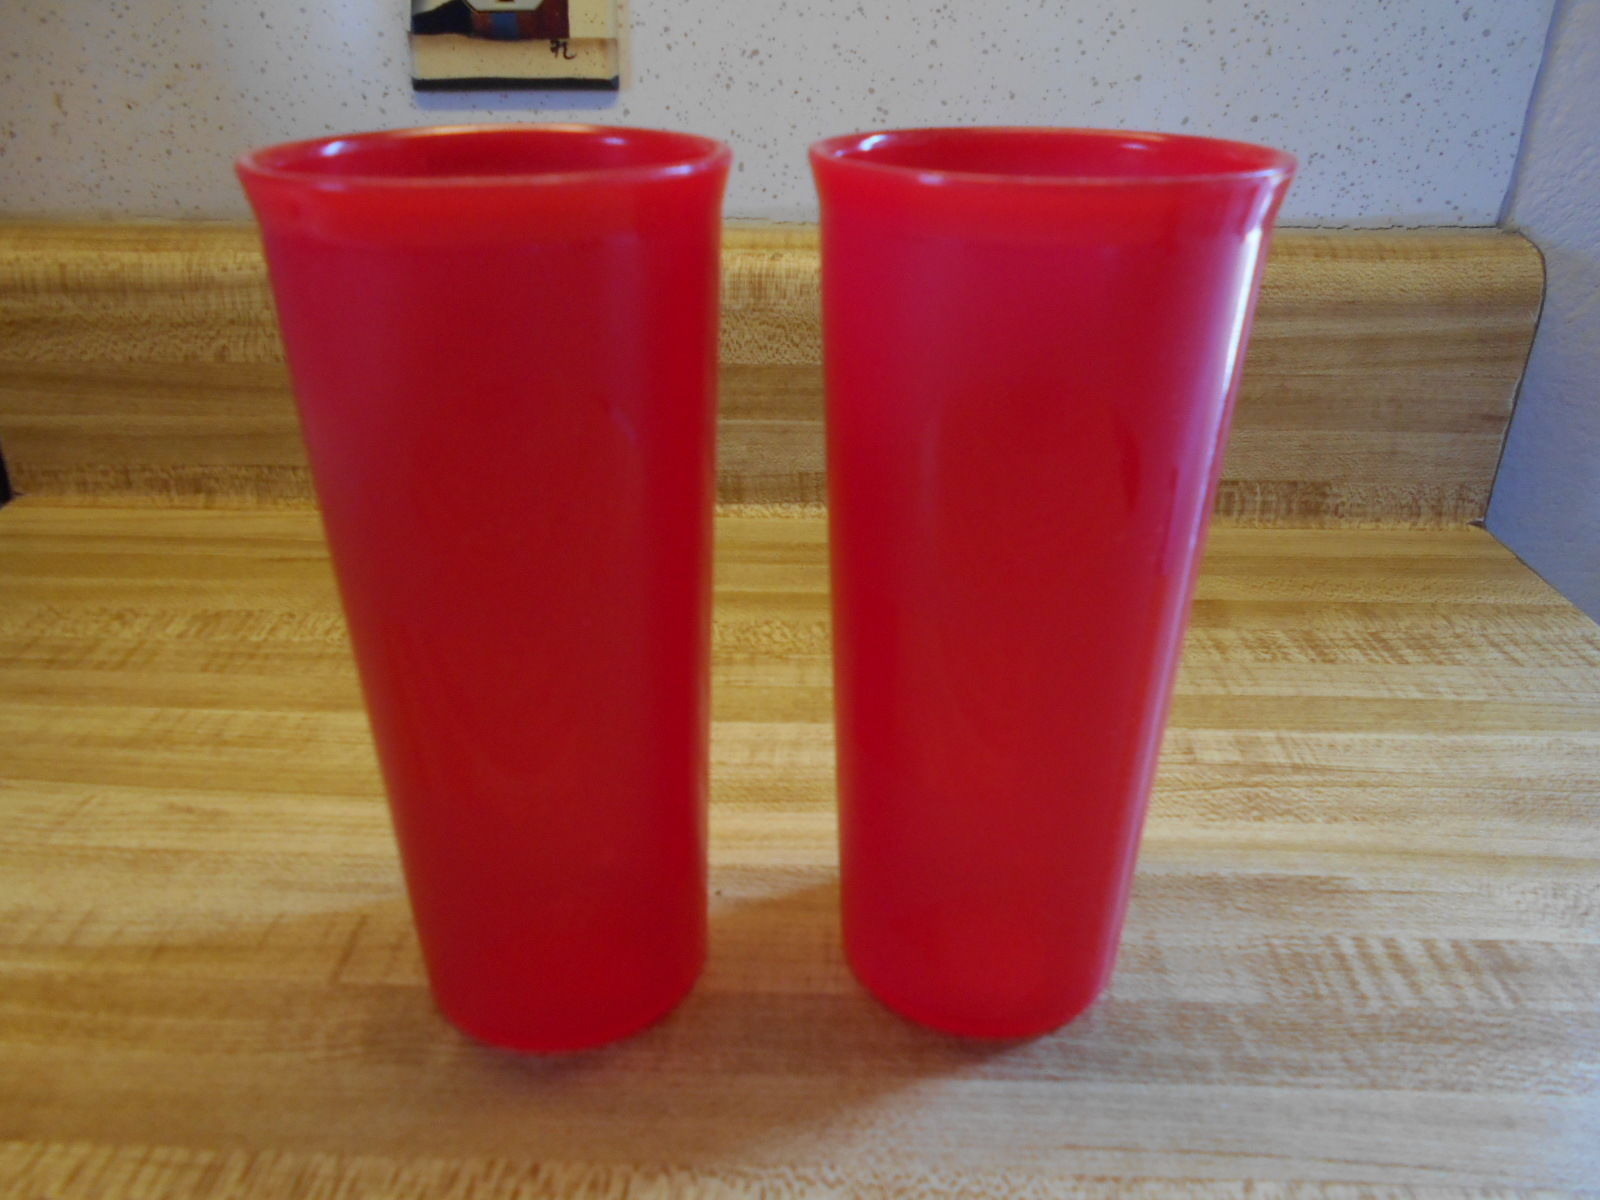 Red tupperware tumblers with geometric shapes - $14.20